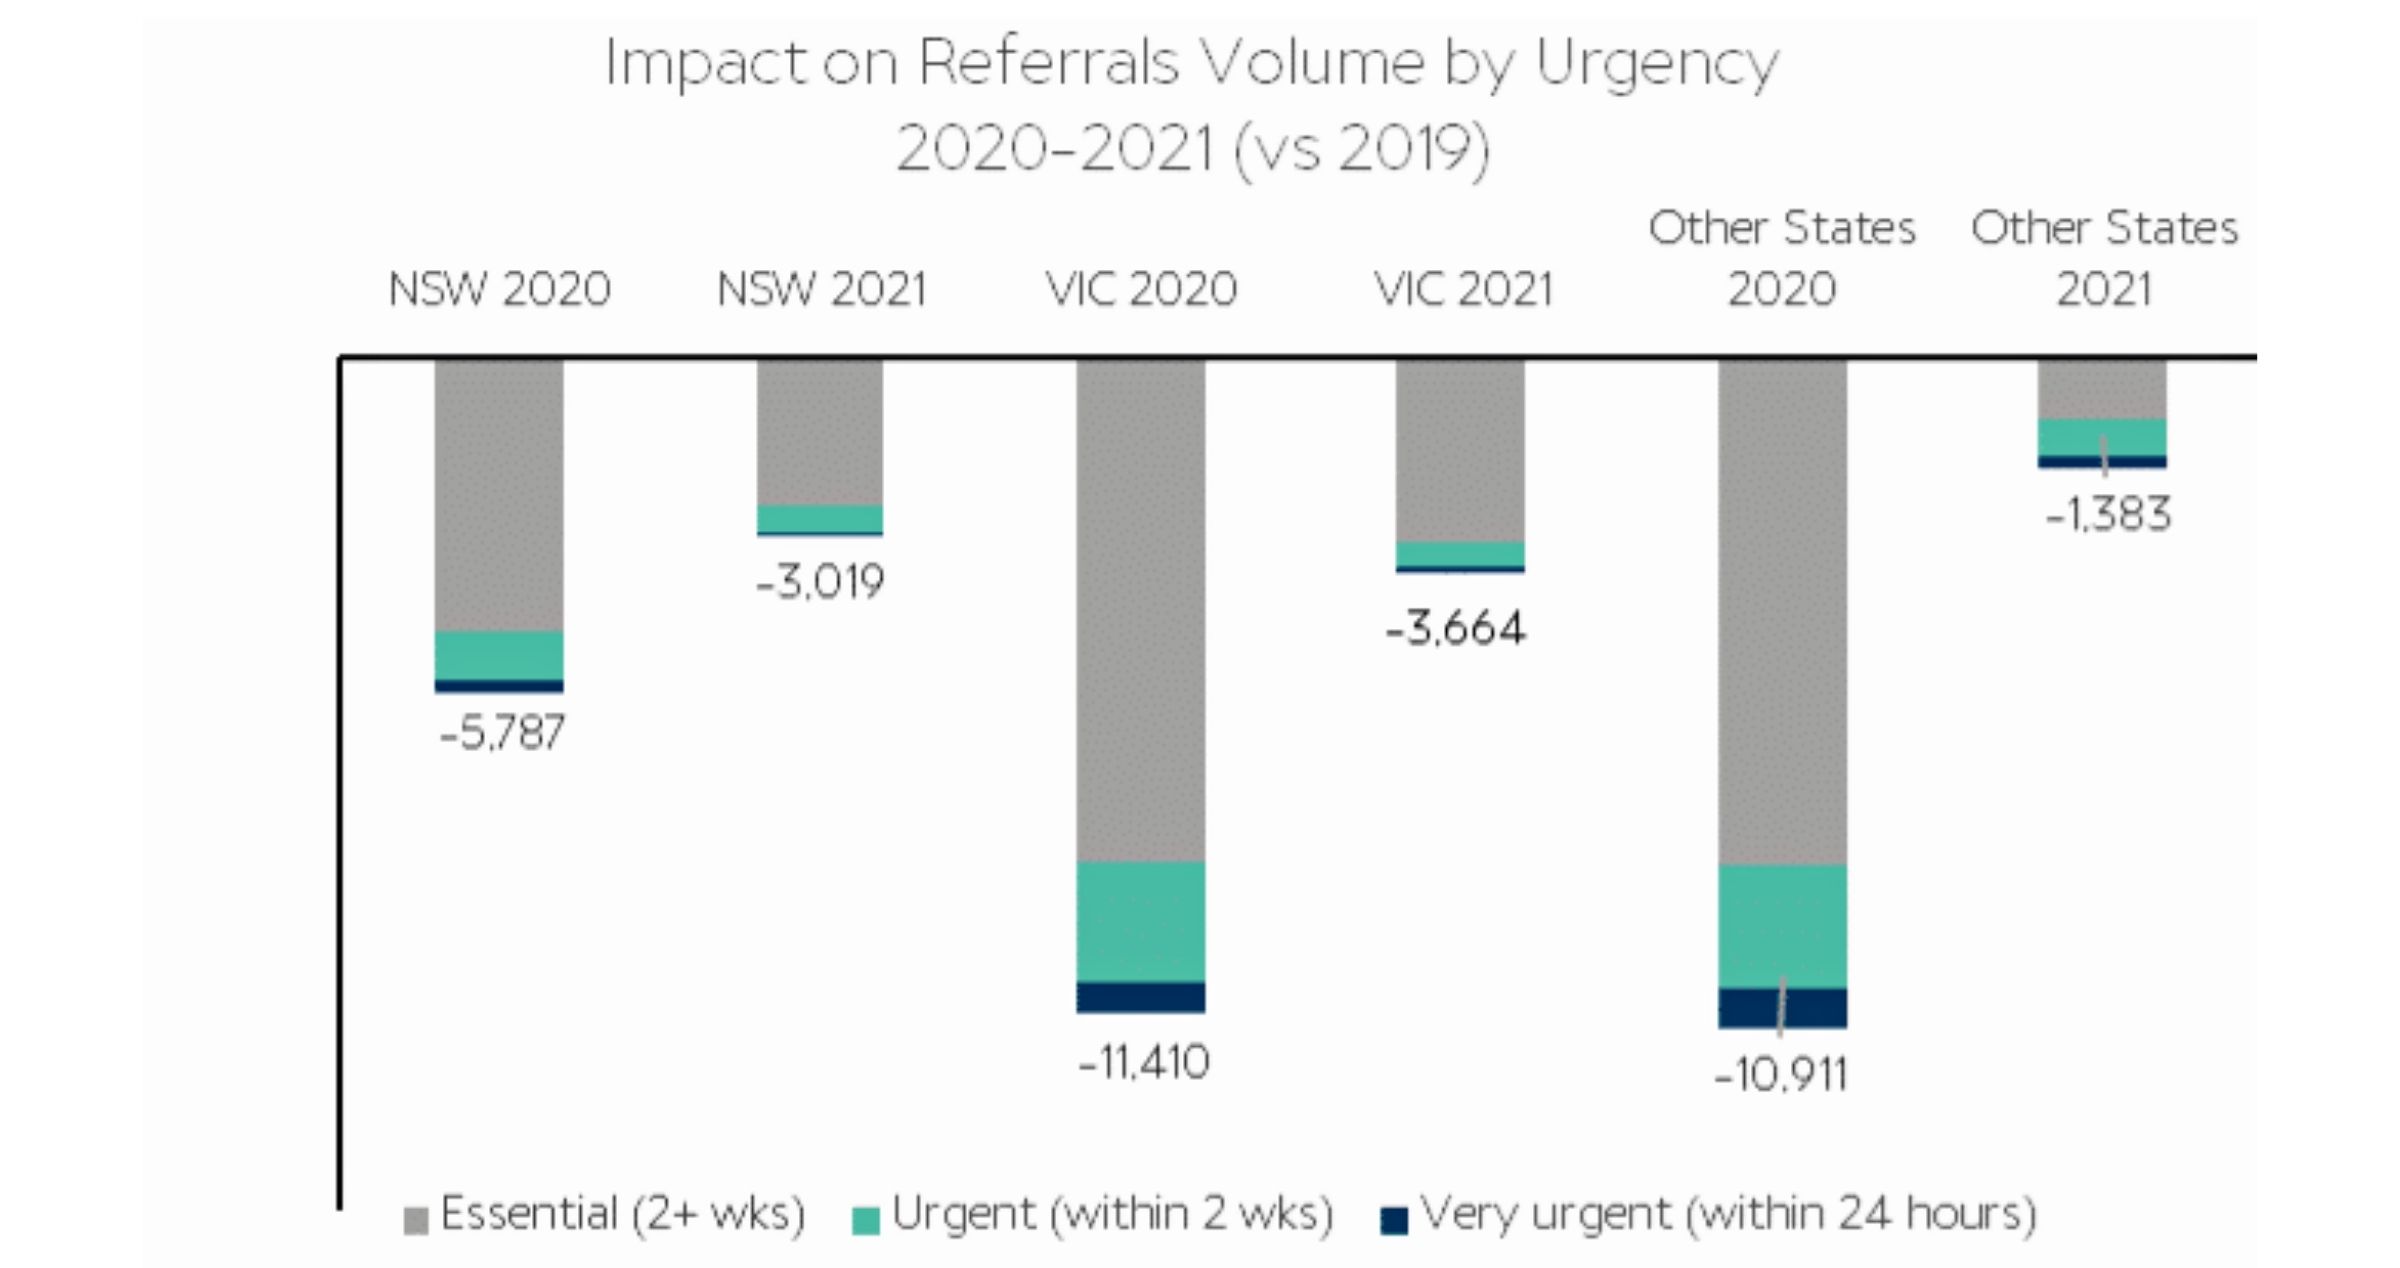 Figure 2 – COVID-19 impact on referral volume by urgency in NSW, Victoria and other Australian states in 2020 and 2021, which dipped compared to pre-pandemic 2019.